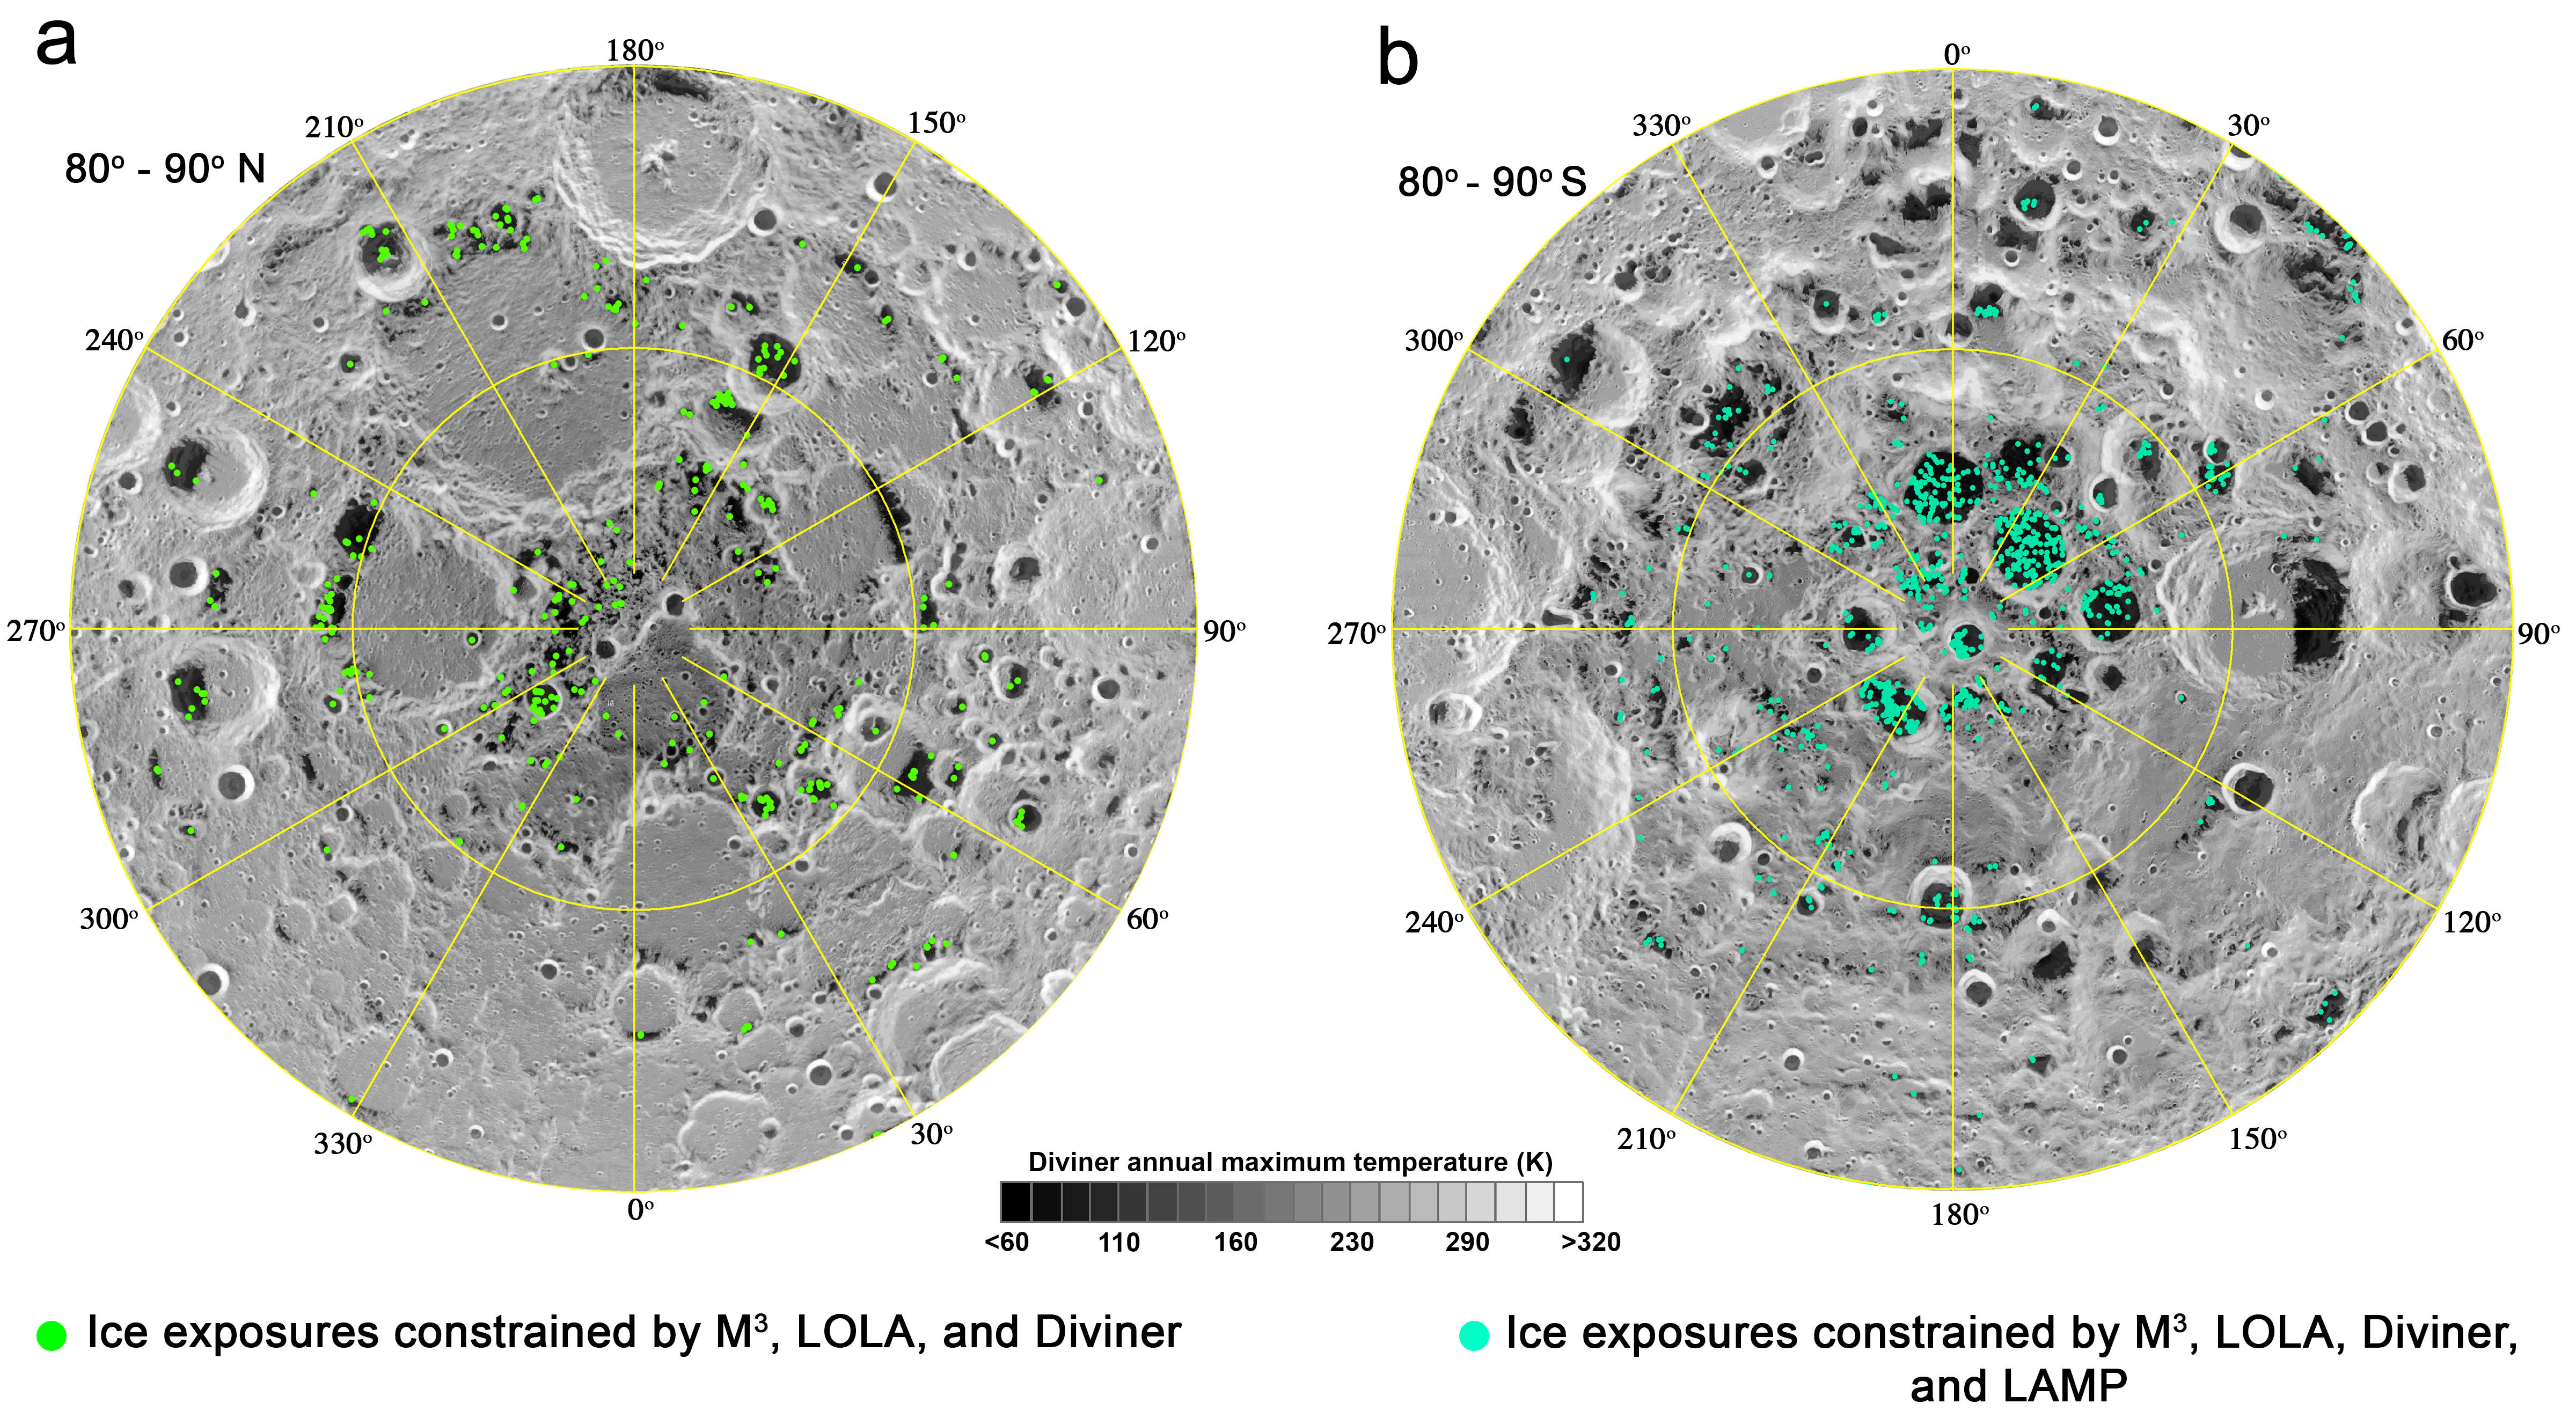 Surface exposed water ice (green and blue dots) in the lunar polar regions overlain on the annual maximum temperature (darker=colder, brighter=warmer). Credit: Shuai Li.